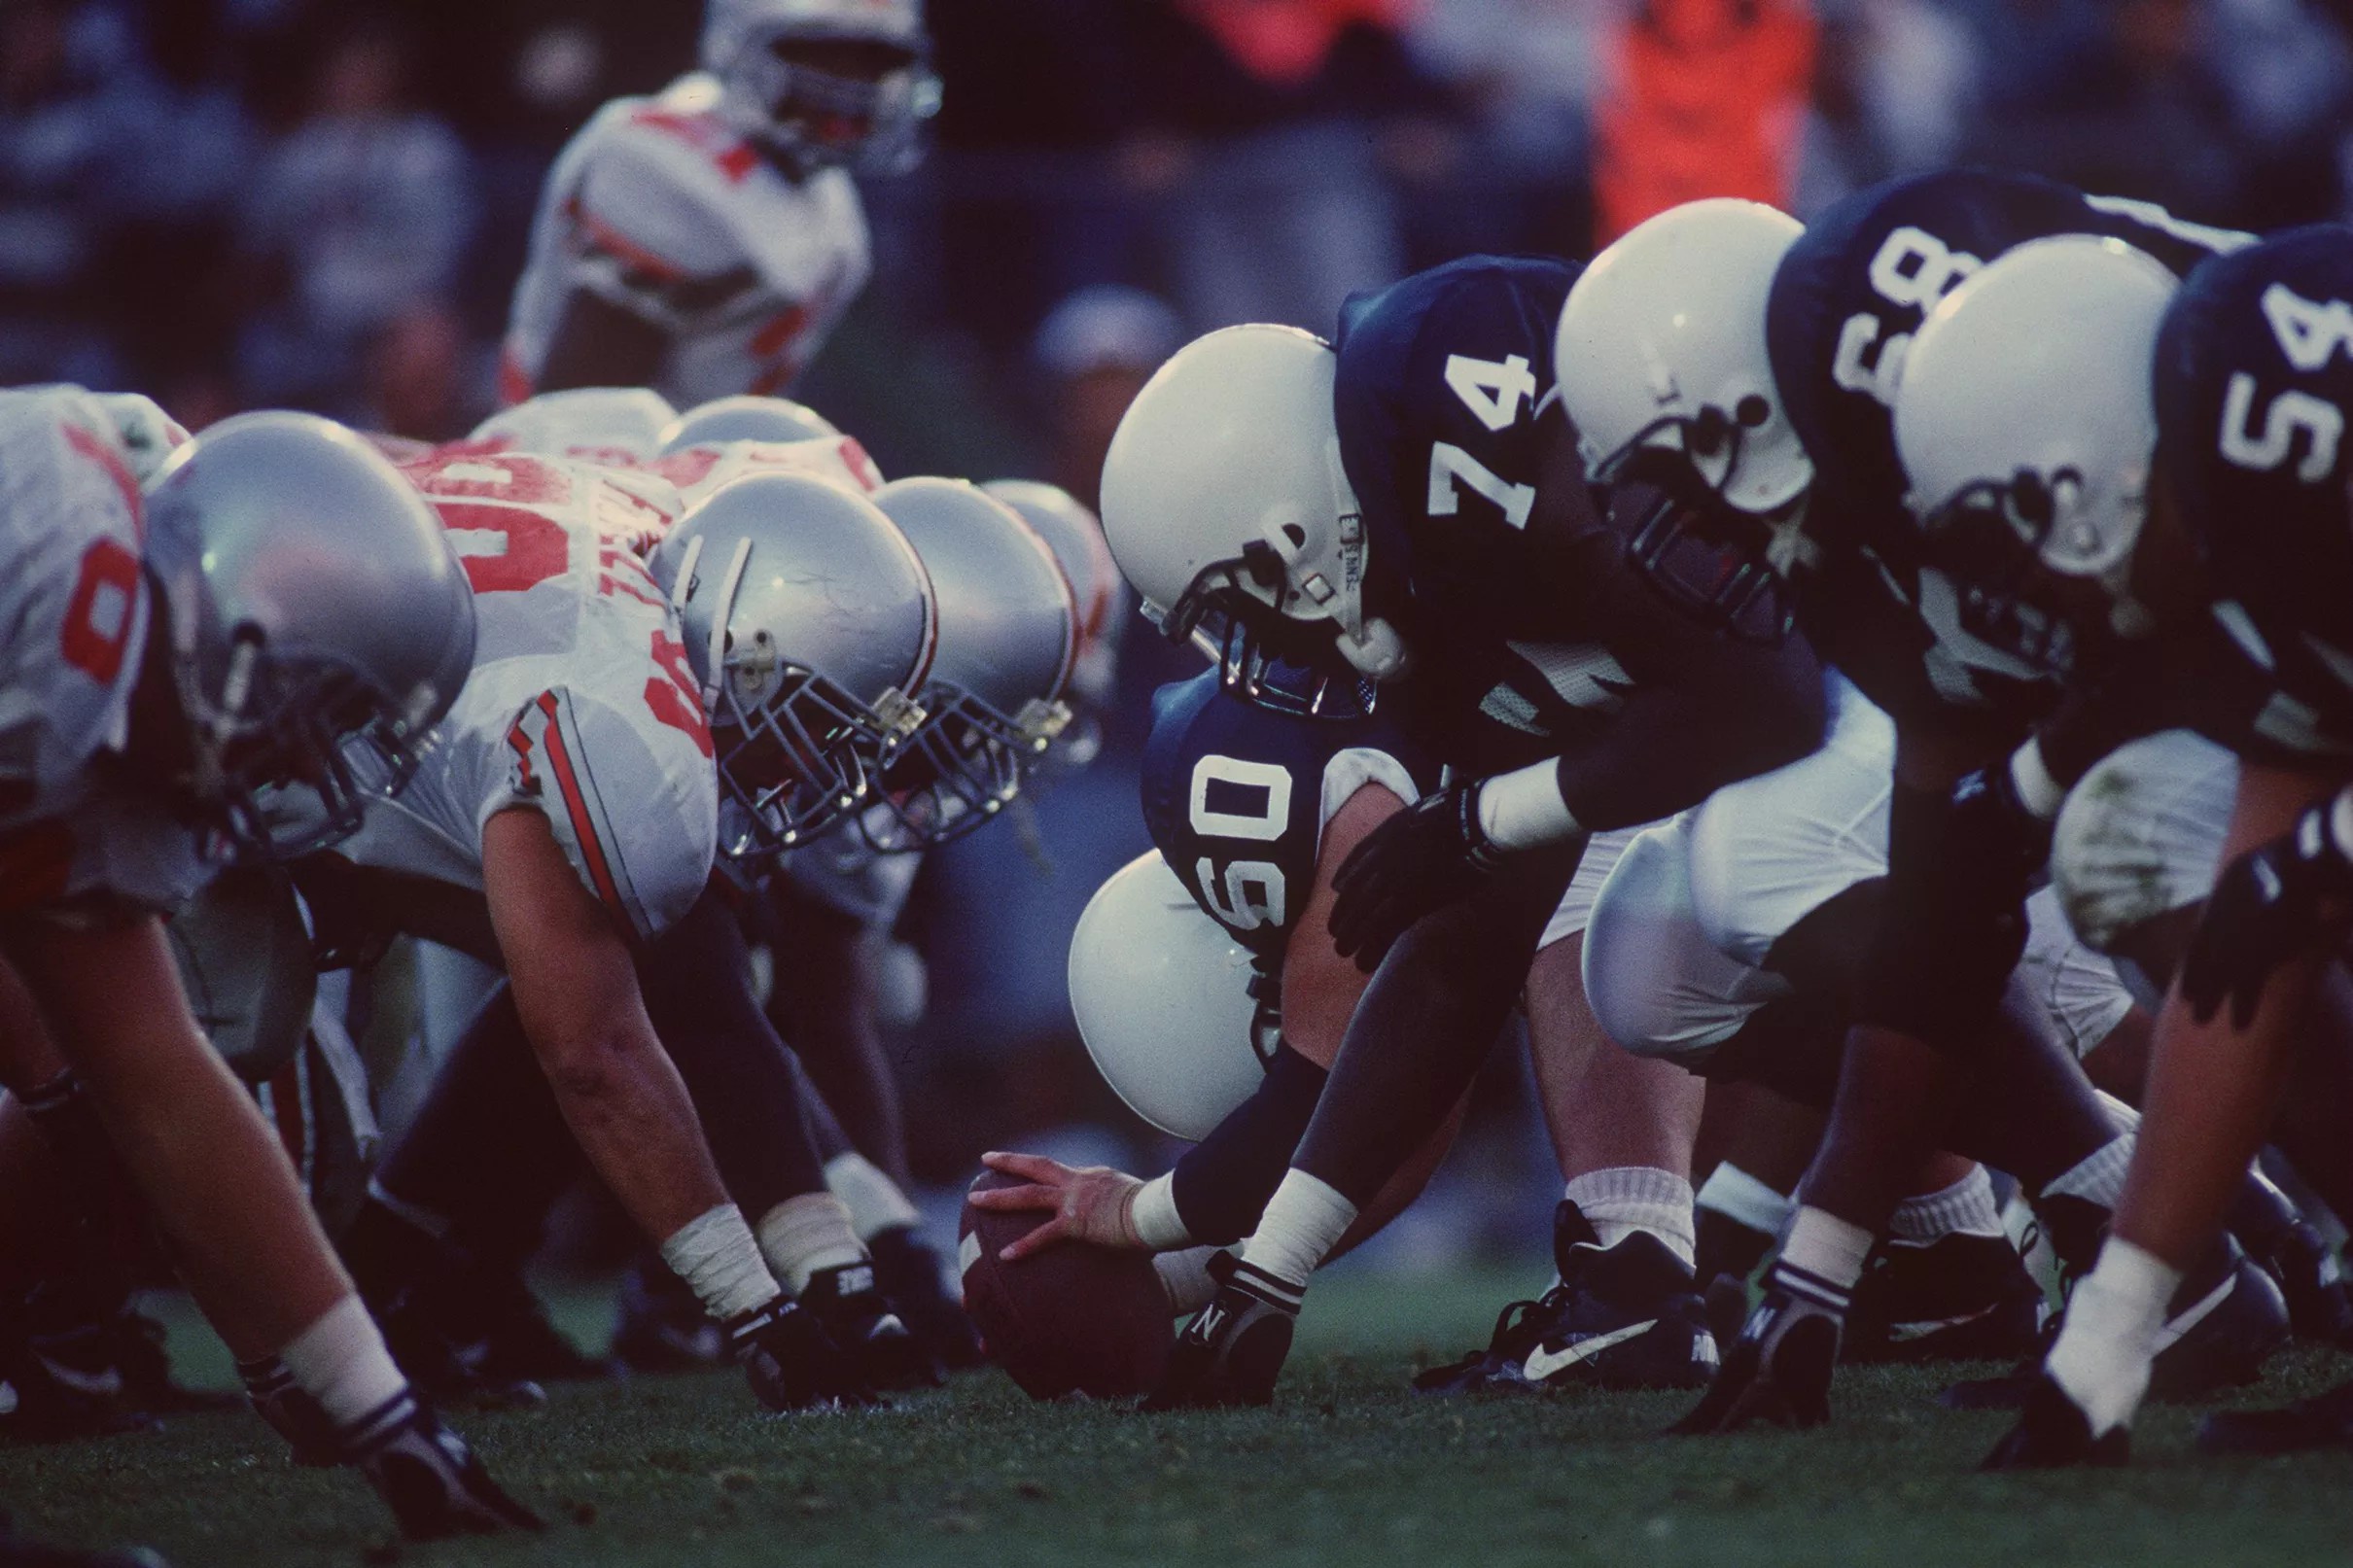 Rivalry or Not, Penn StateOhio State is One of College Football’s